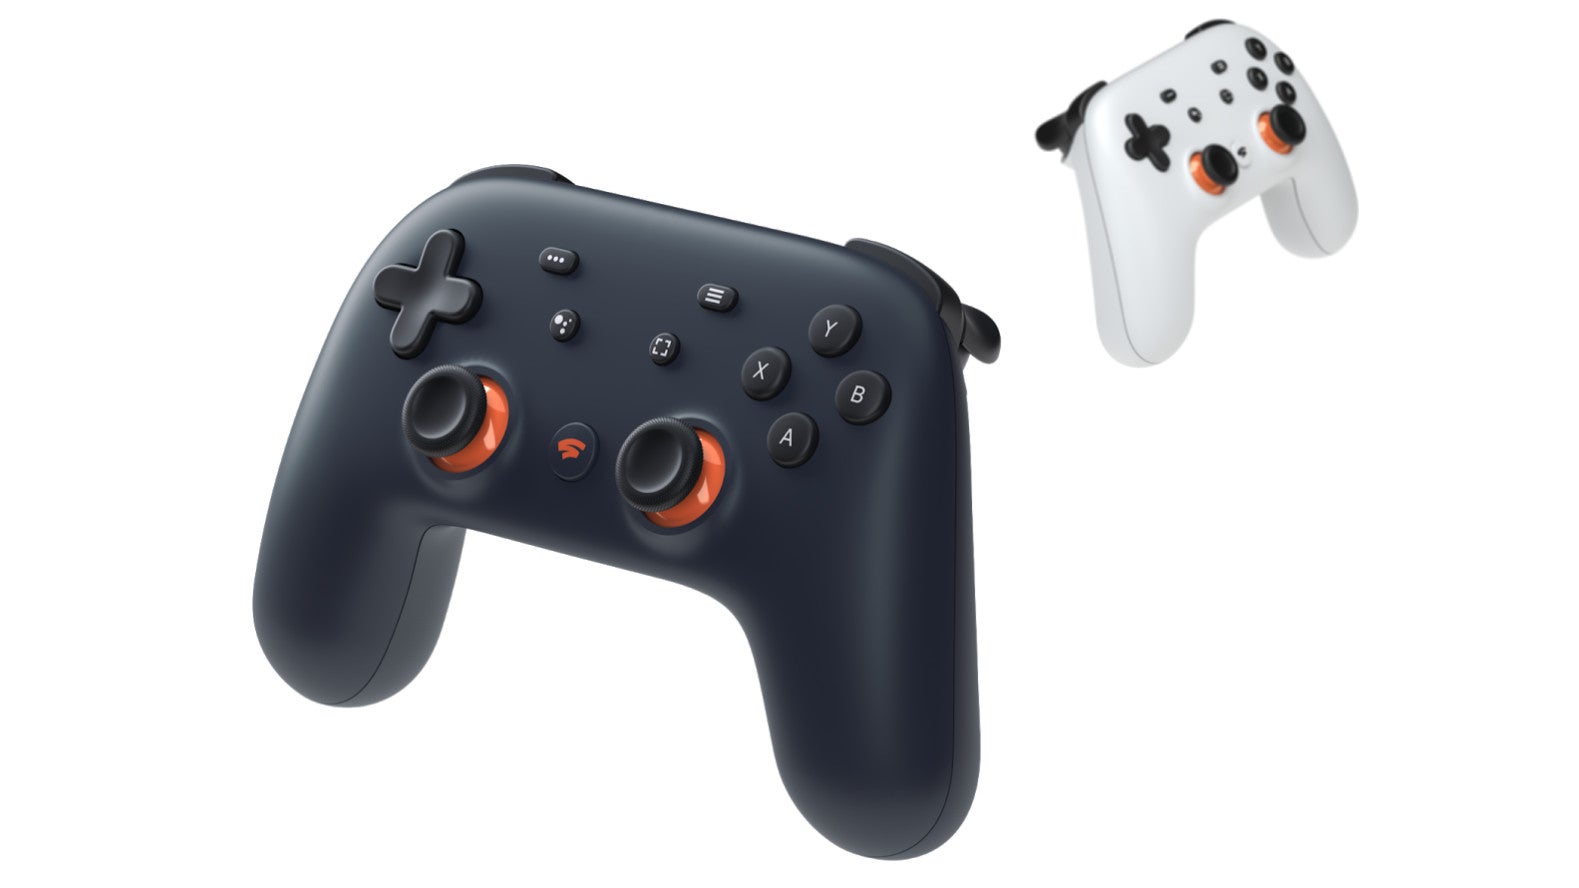 Image for "Moving to the cloud is scary", Google Stadia director says deflecting shutdown concerns